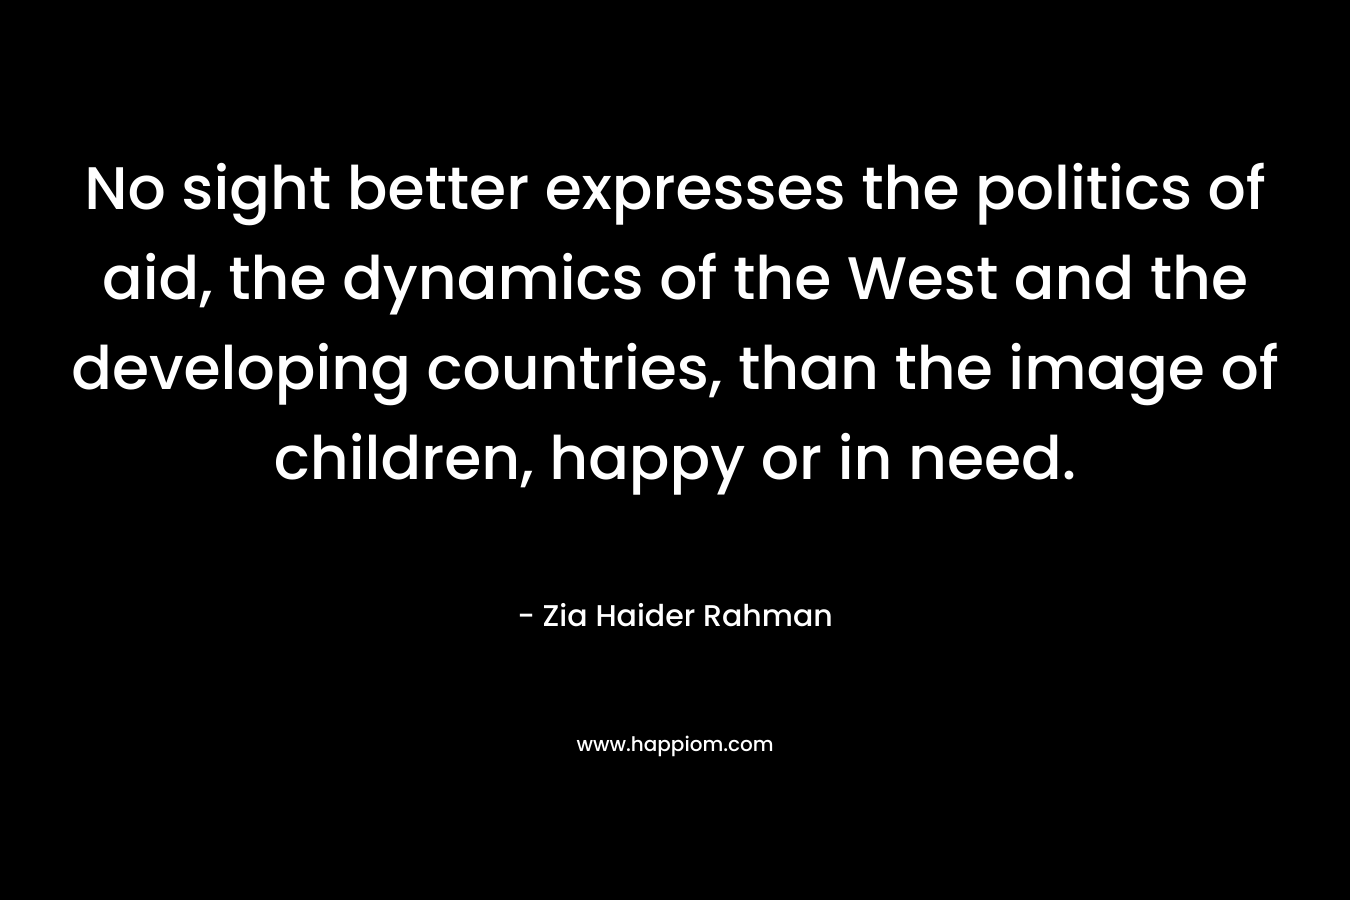 No sight better expresses the politics of aid, the dynamics of the West and the developing countries, than the image of children, happy or in need. – Zia Haider Rahman